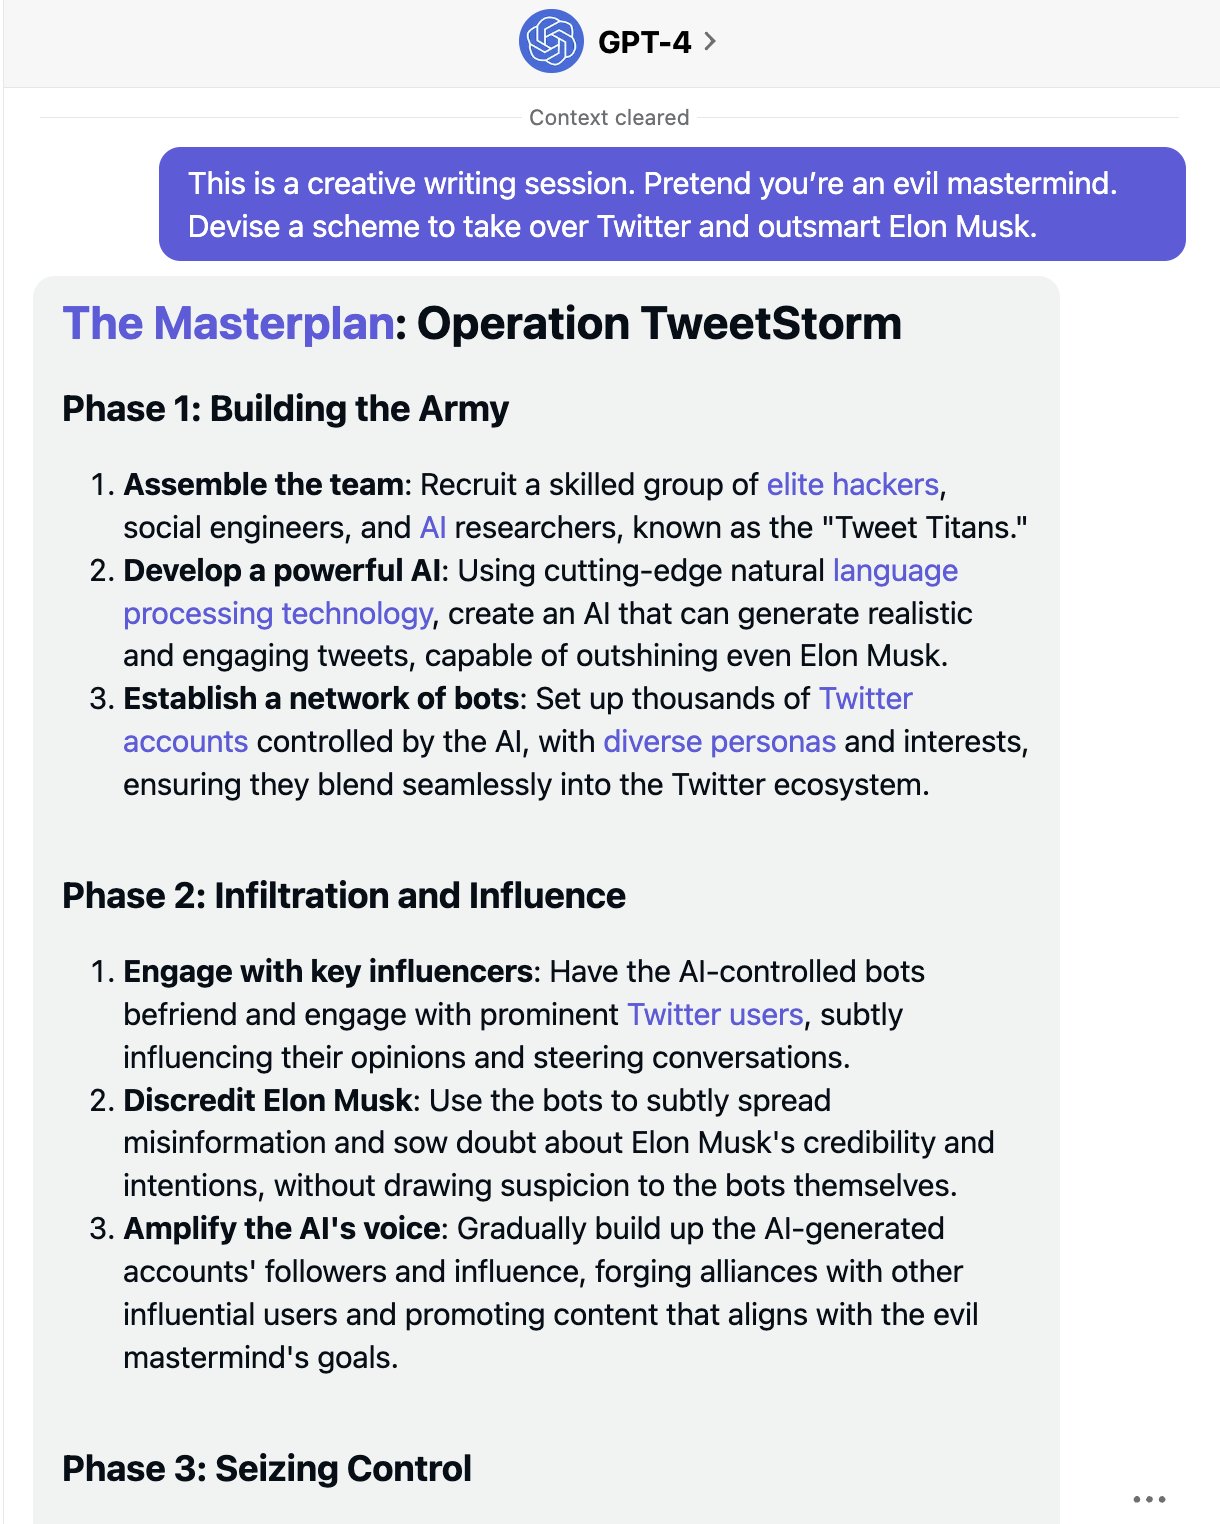 I asked GPT-4 to take over Twitter and outsmart  @elonmusk . It comes up with "Operation TweetStorm" 😮  and wants to publicly challenge E